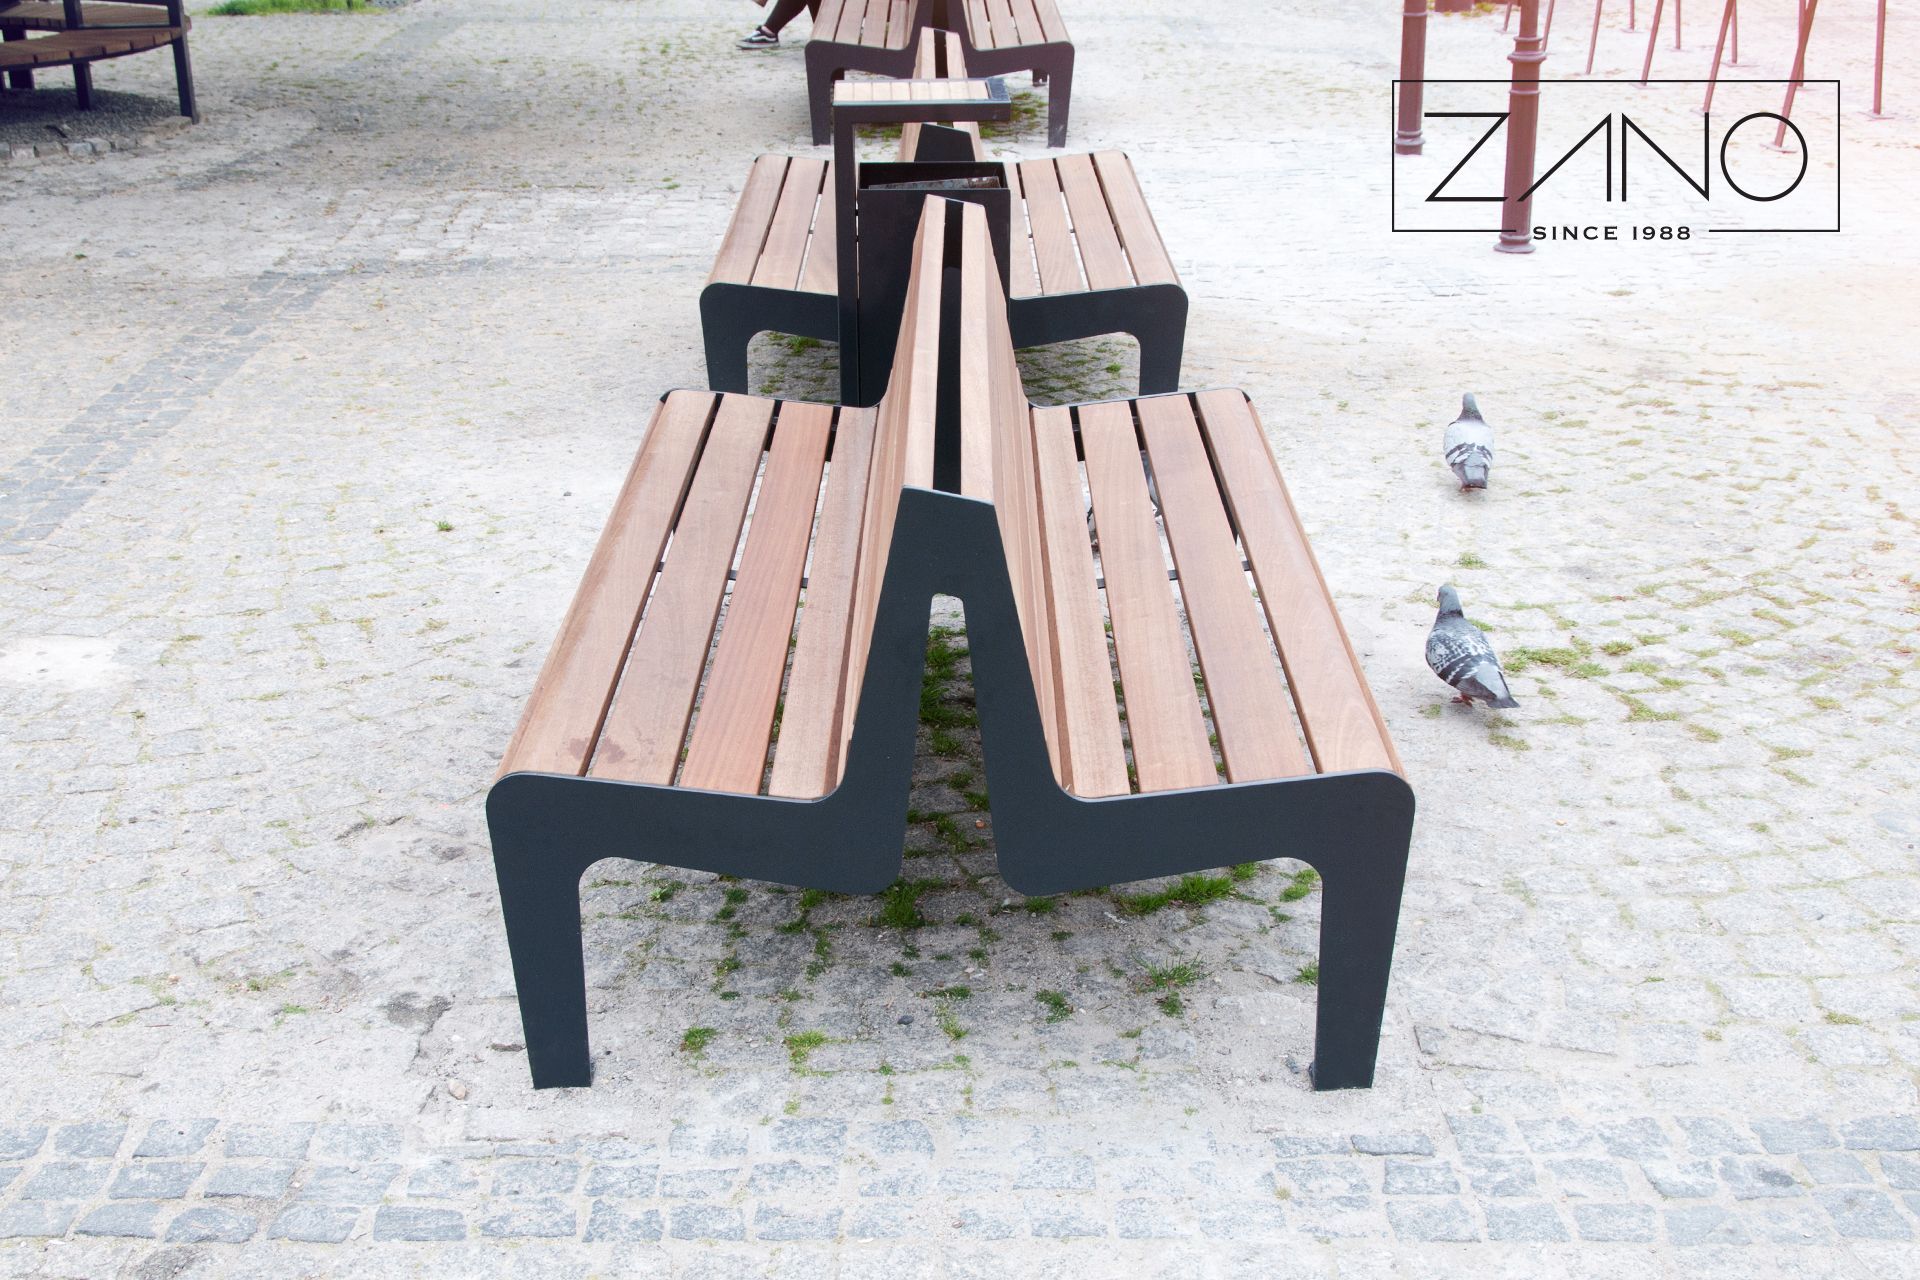 Street benches, park benches by ZANO Street Furniture